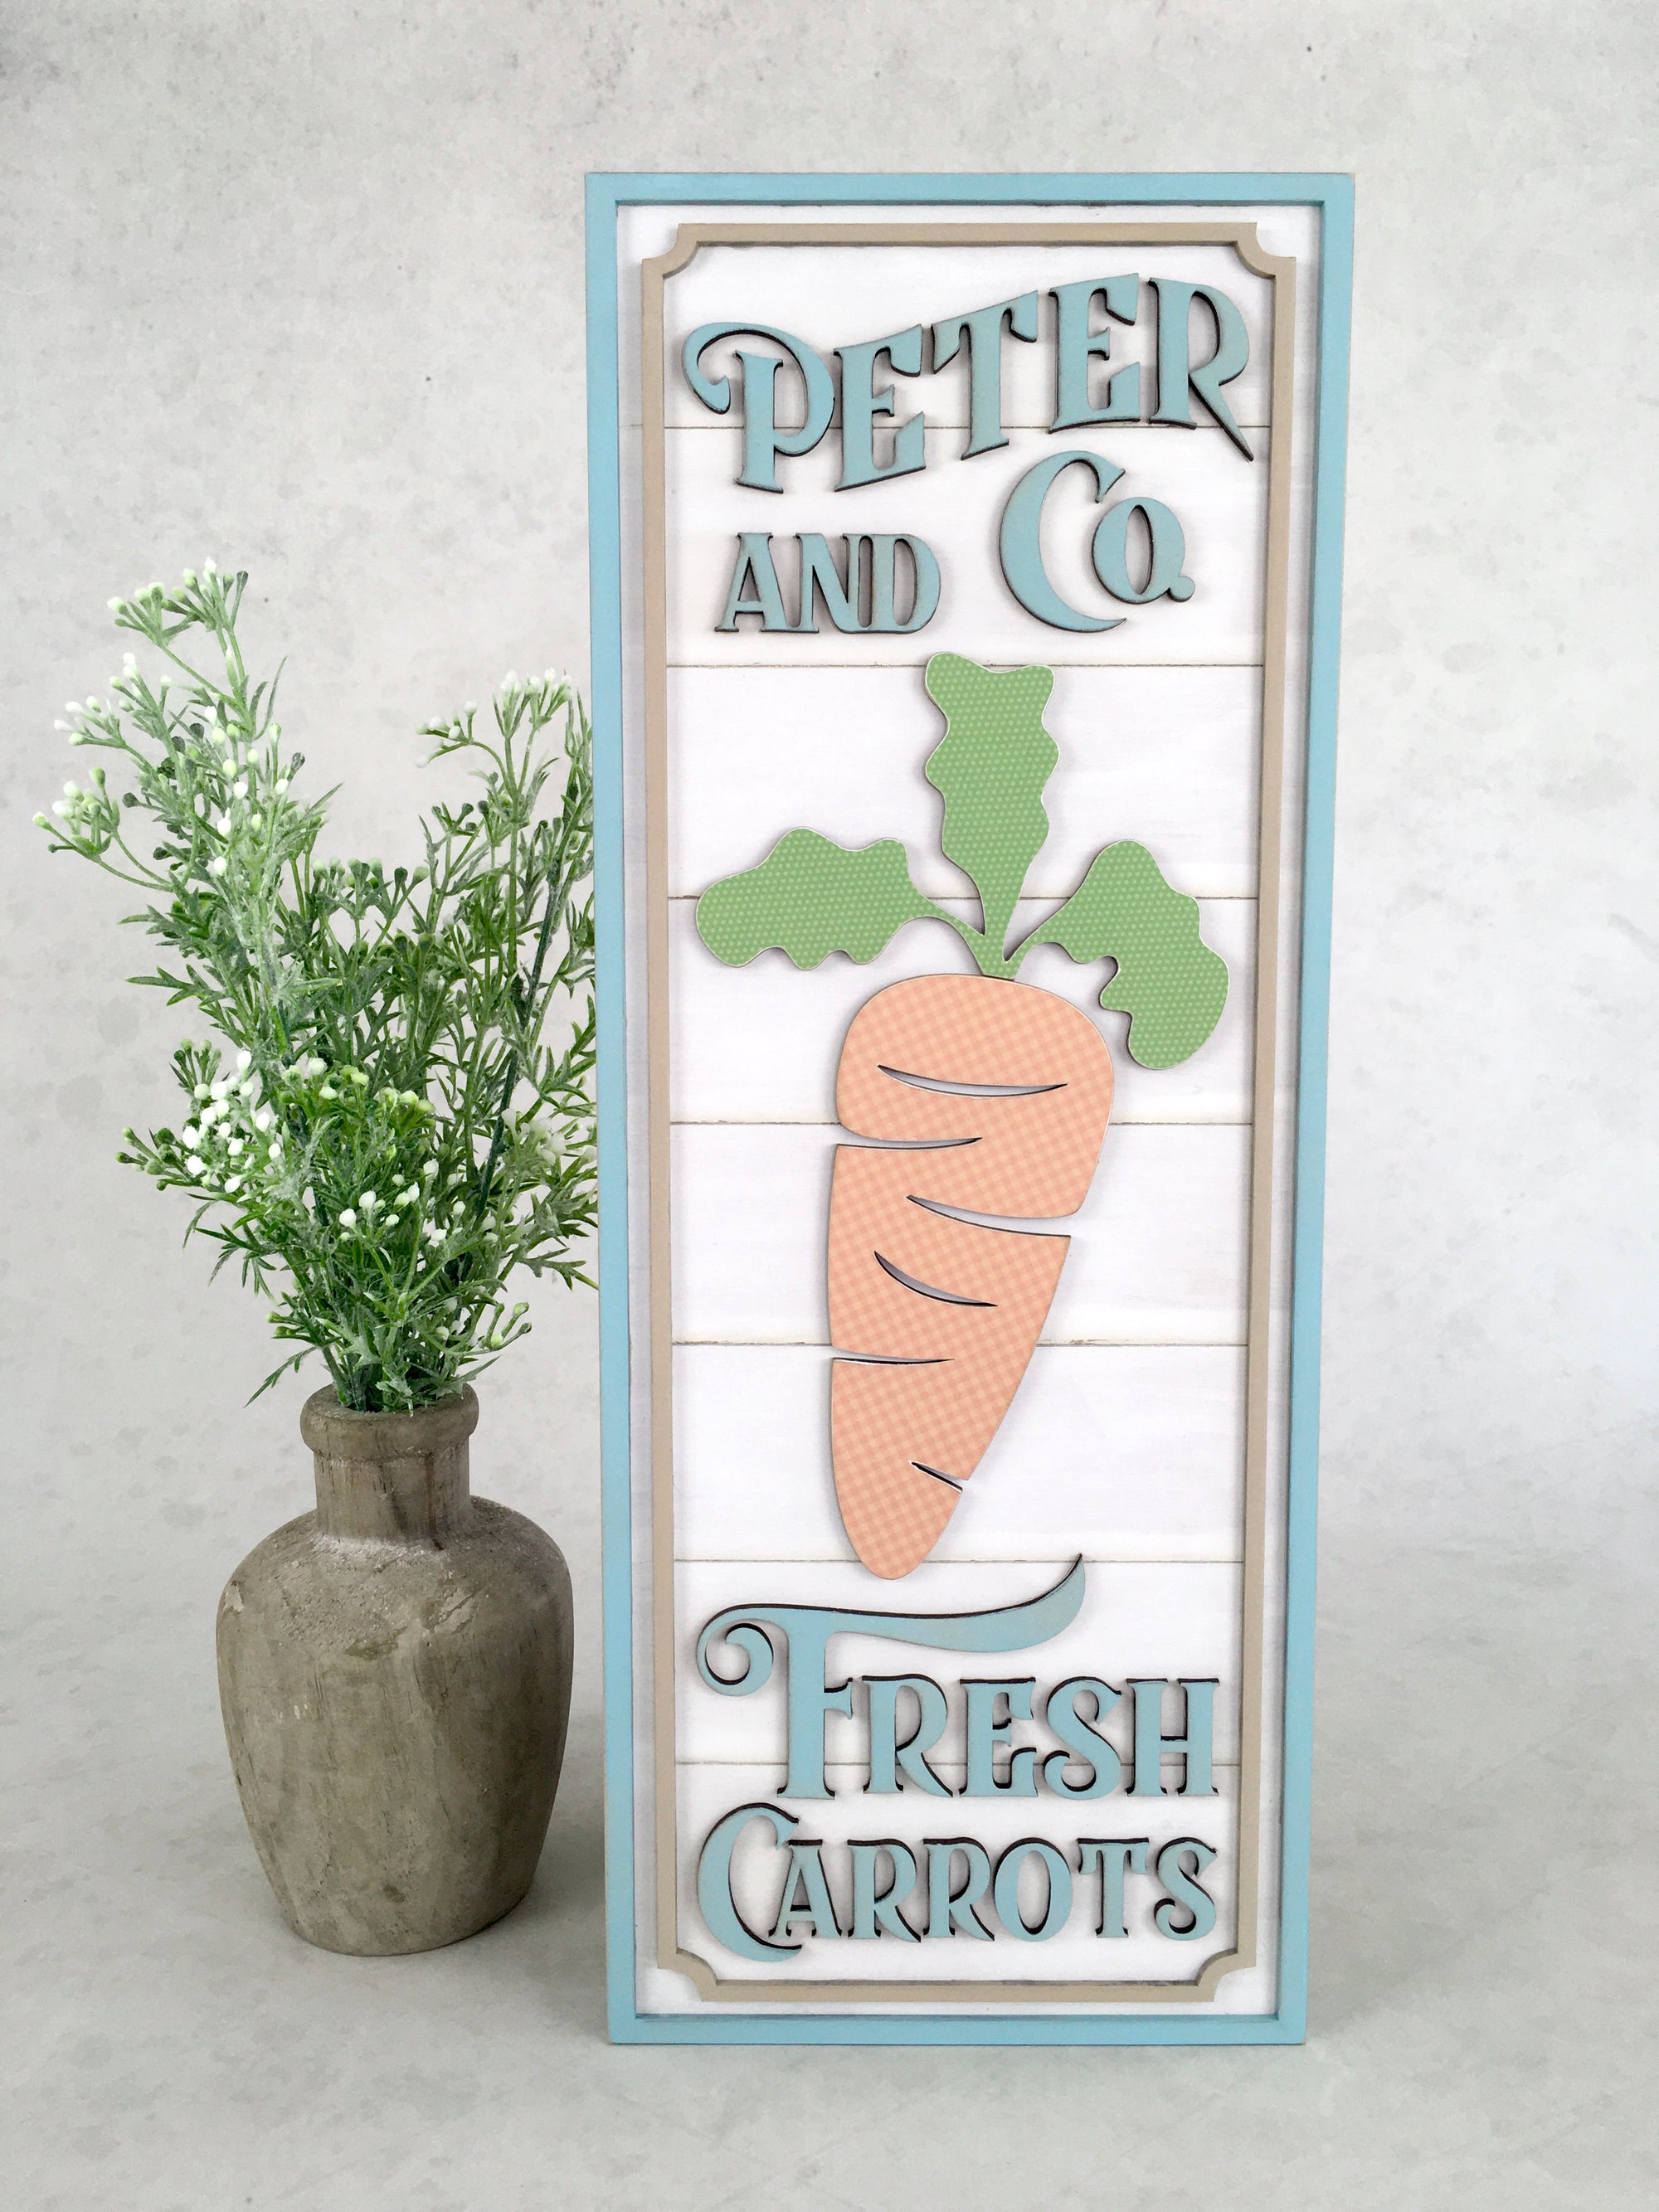 Carrot Easter shiplap sign decoation for home decorating. Easter wood decorations. Easter sign for mantle, fireplace, countertop or shelf.